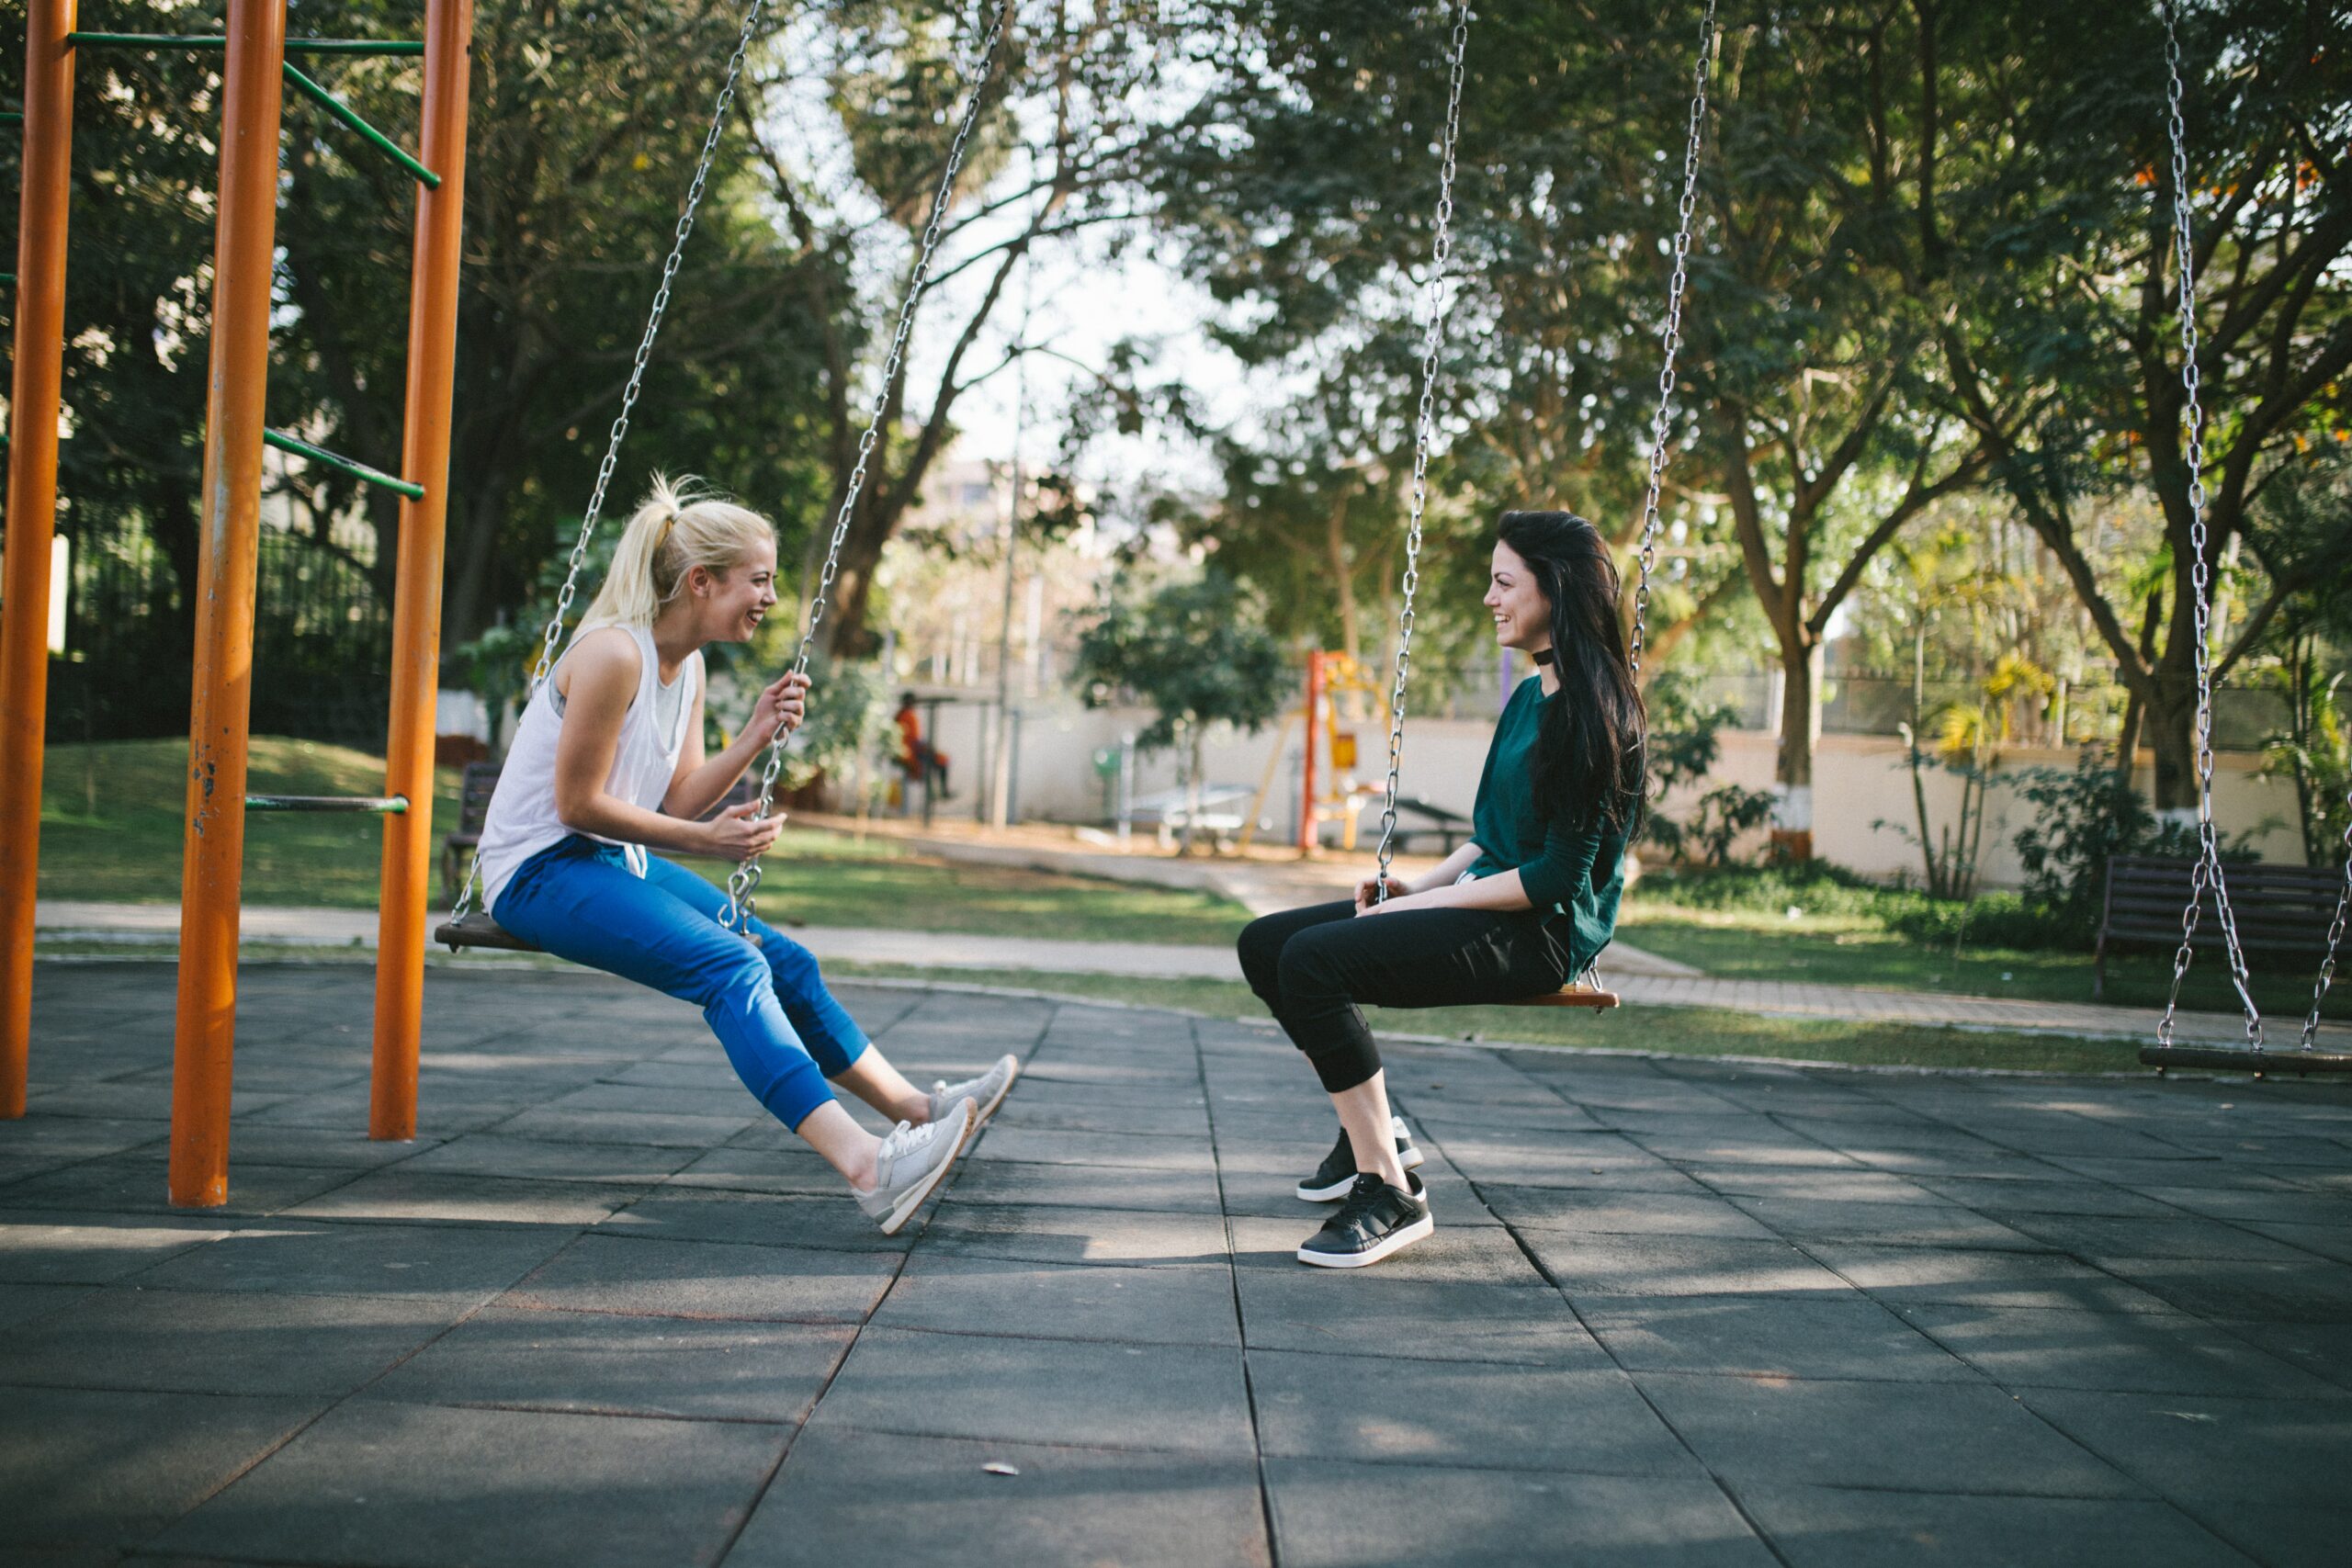 Two women sit and chat on a swingset in the park